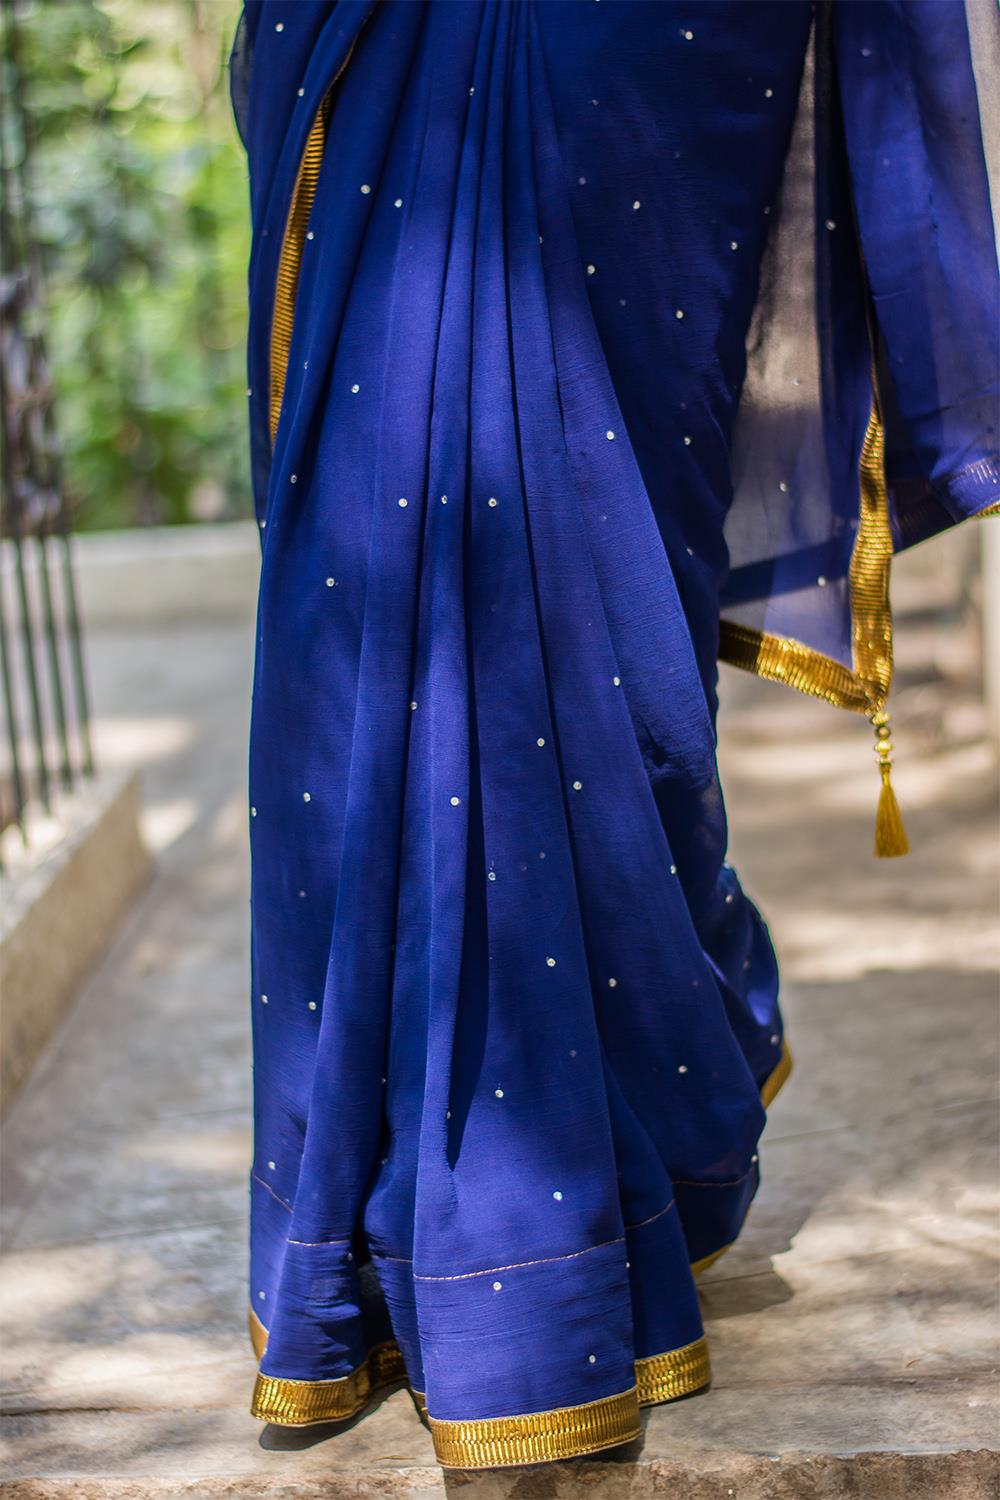 Royal blue georgette saree with stone work